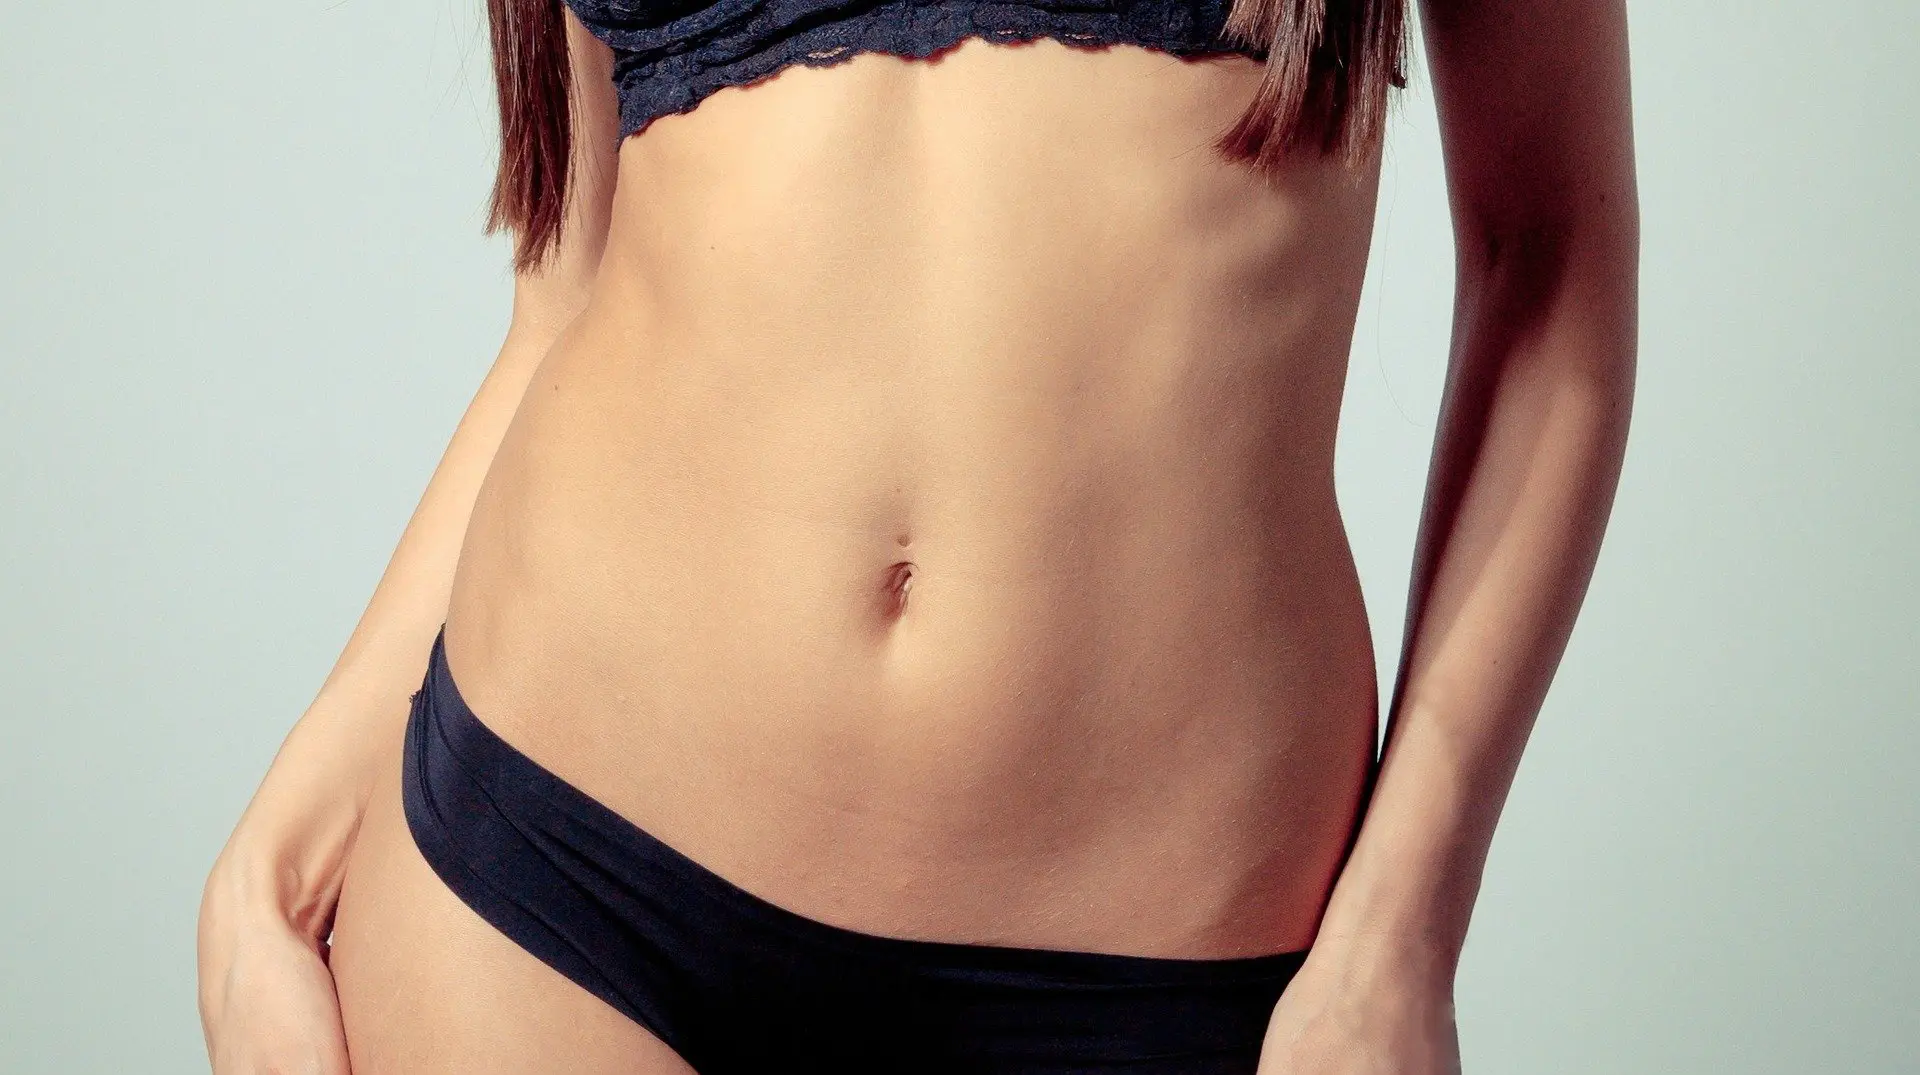 Woman with flat stomach